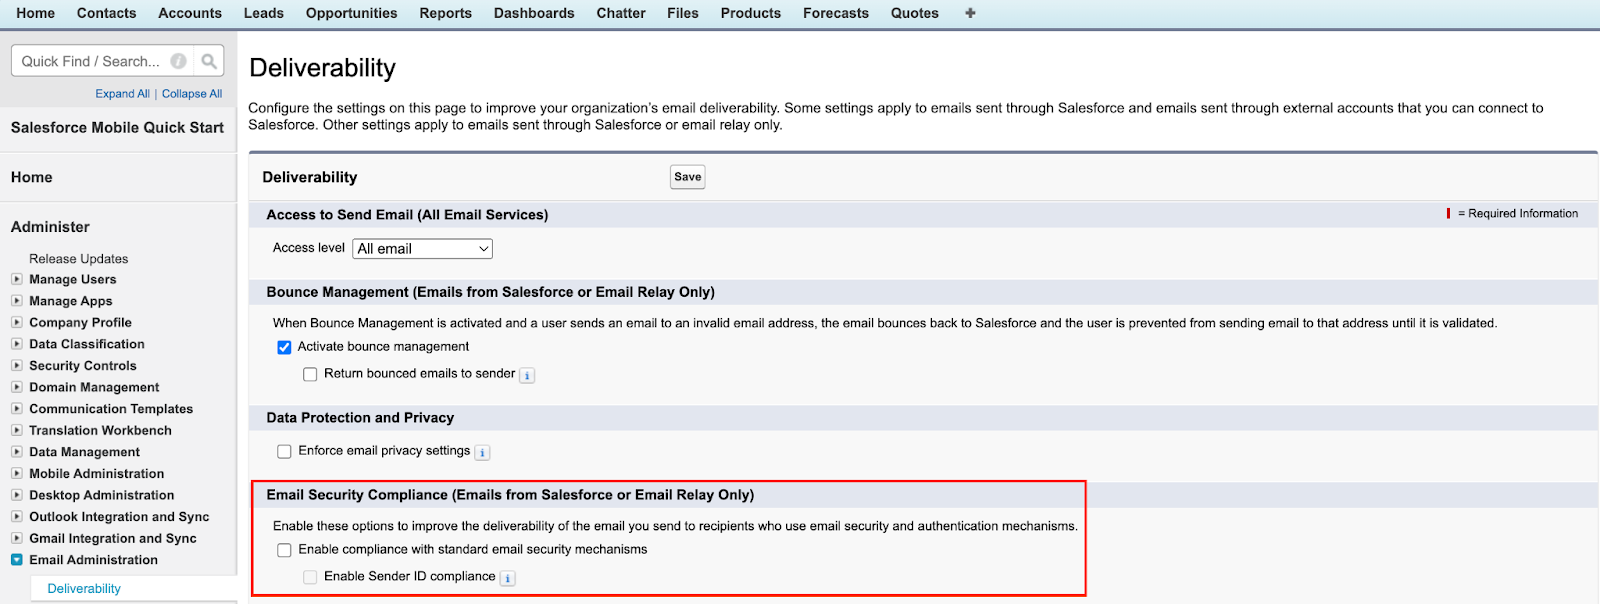 Configuring deliverability settings in Salesforce Classic 